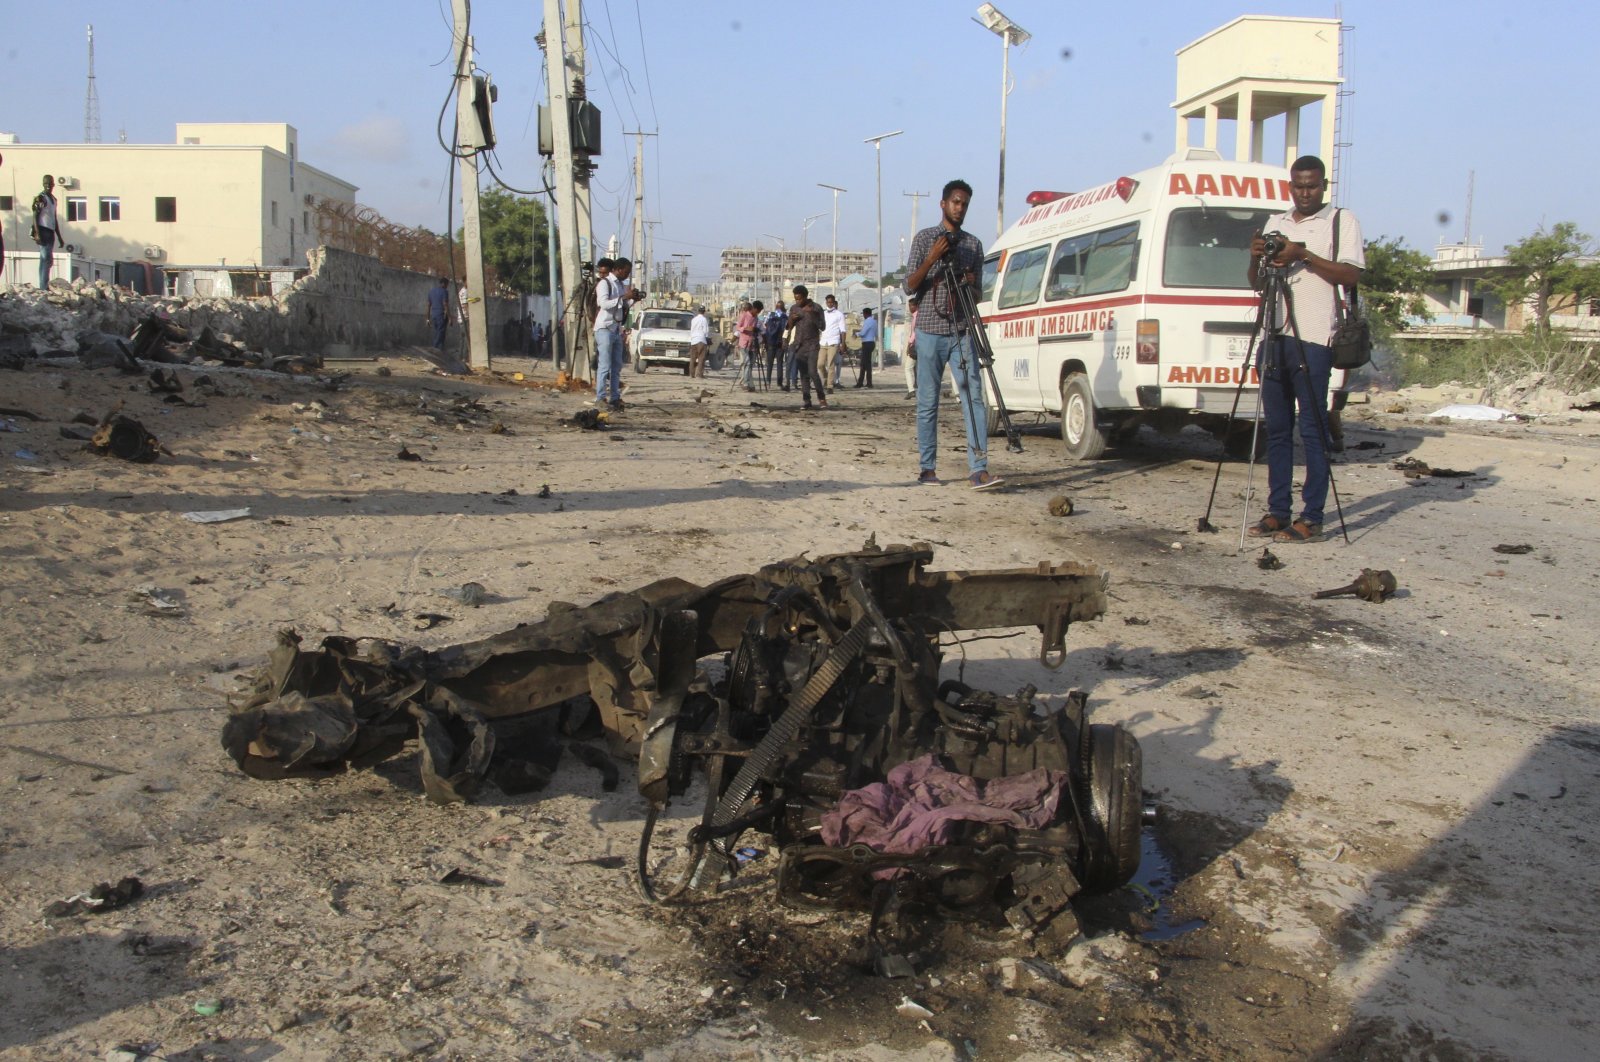 General view of the area near the wreckage of a vehicle after a suicide car bomb attack on a convoy in Mogadishu, Somalia, Nov. 11, 2021. (EPA Photo)